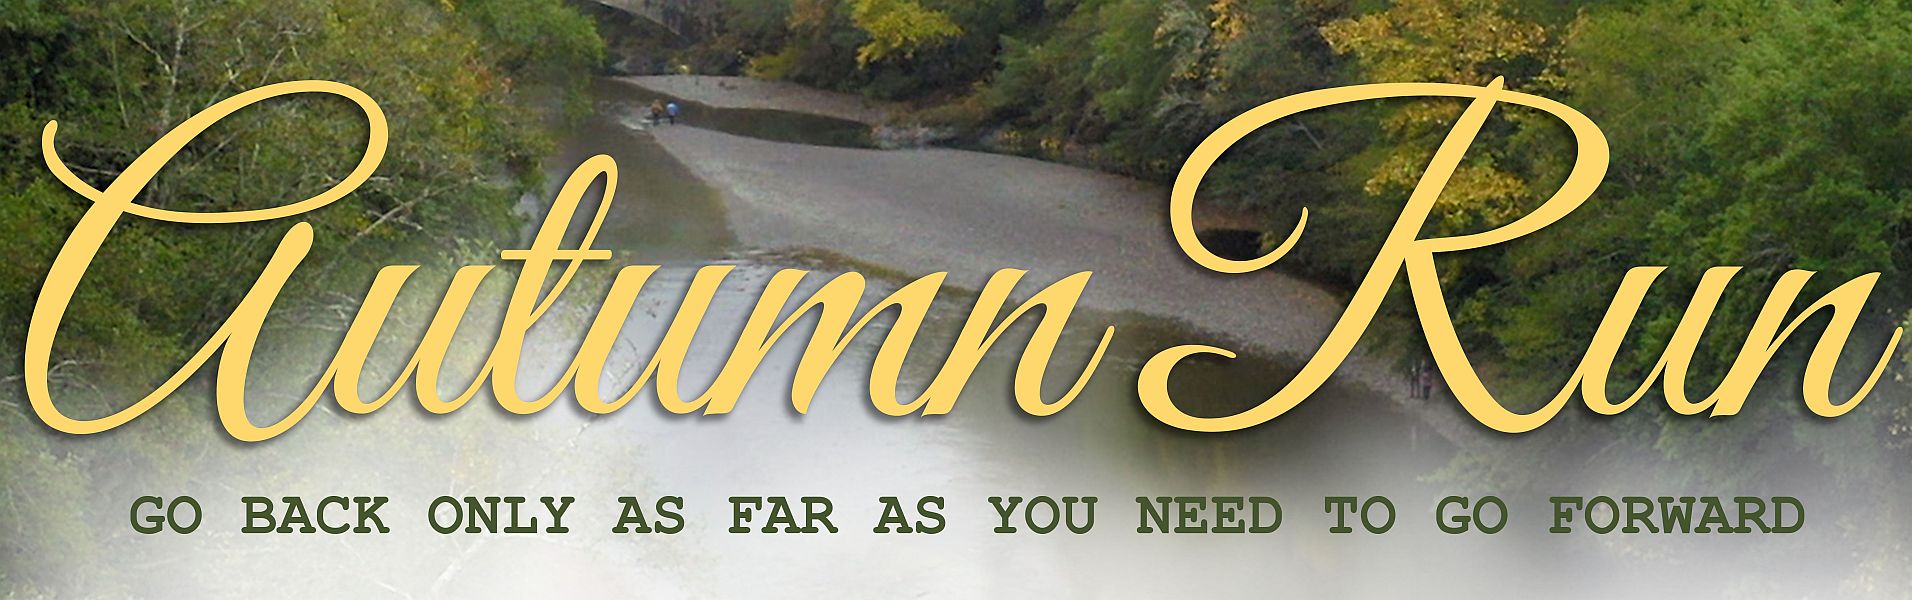 Autumn Run photo showing river and movie title